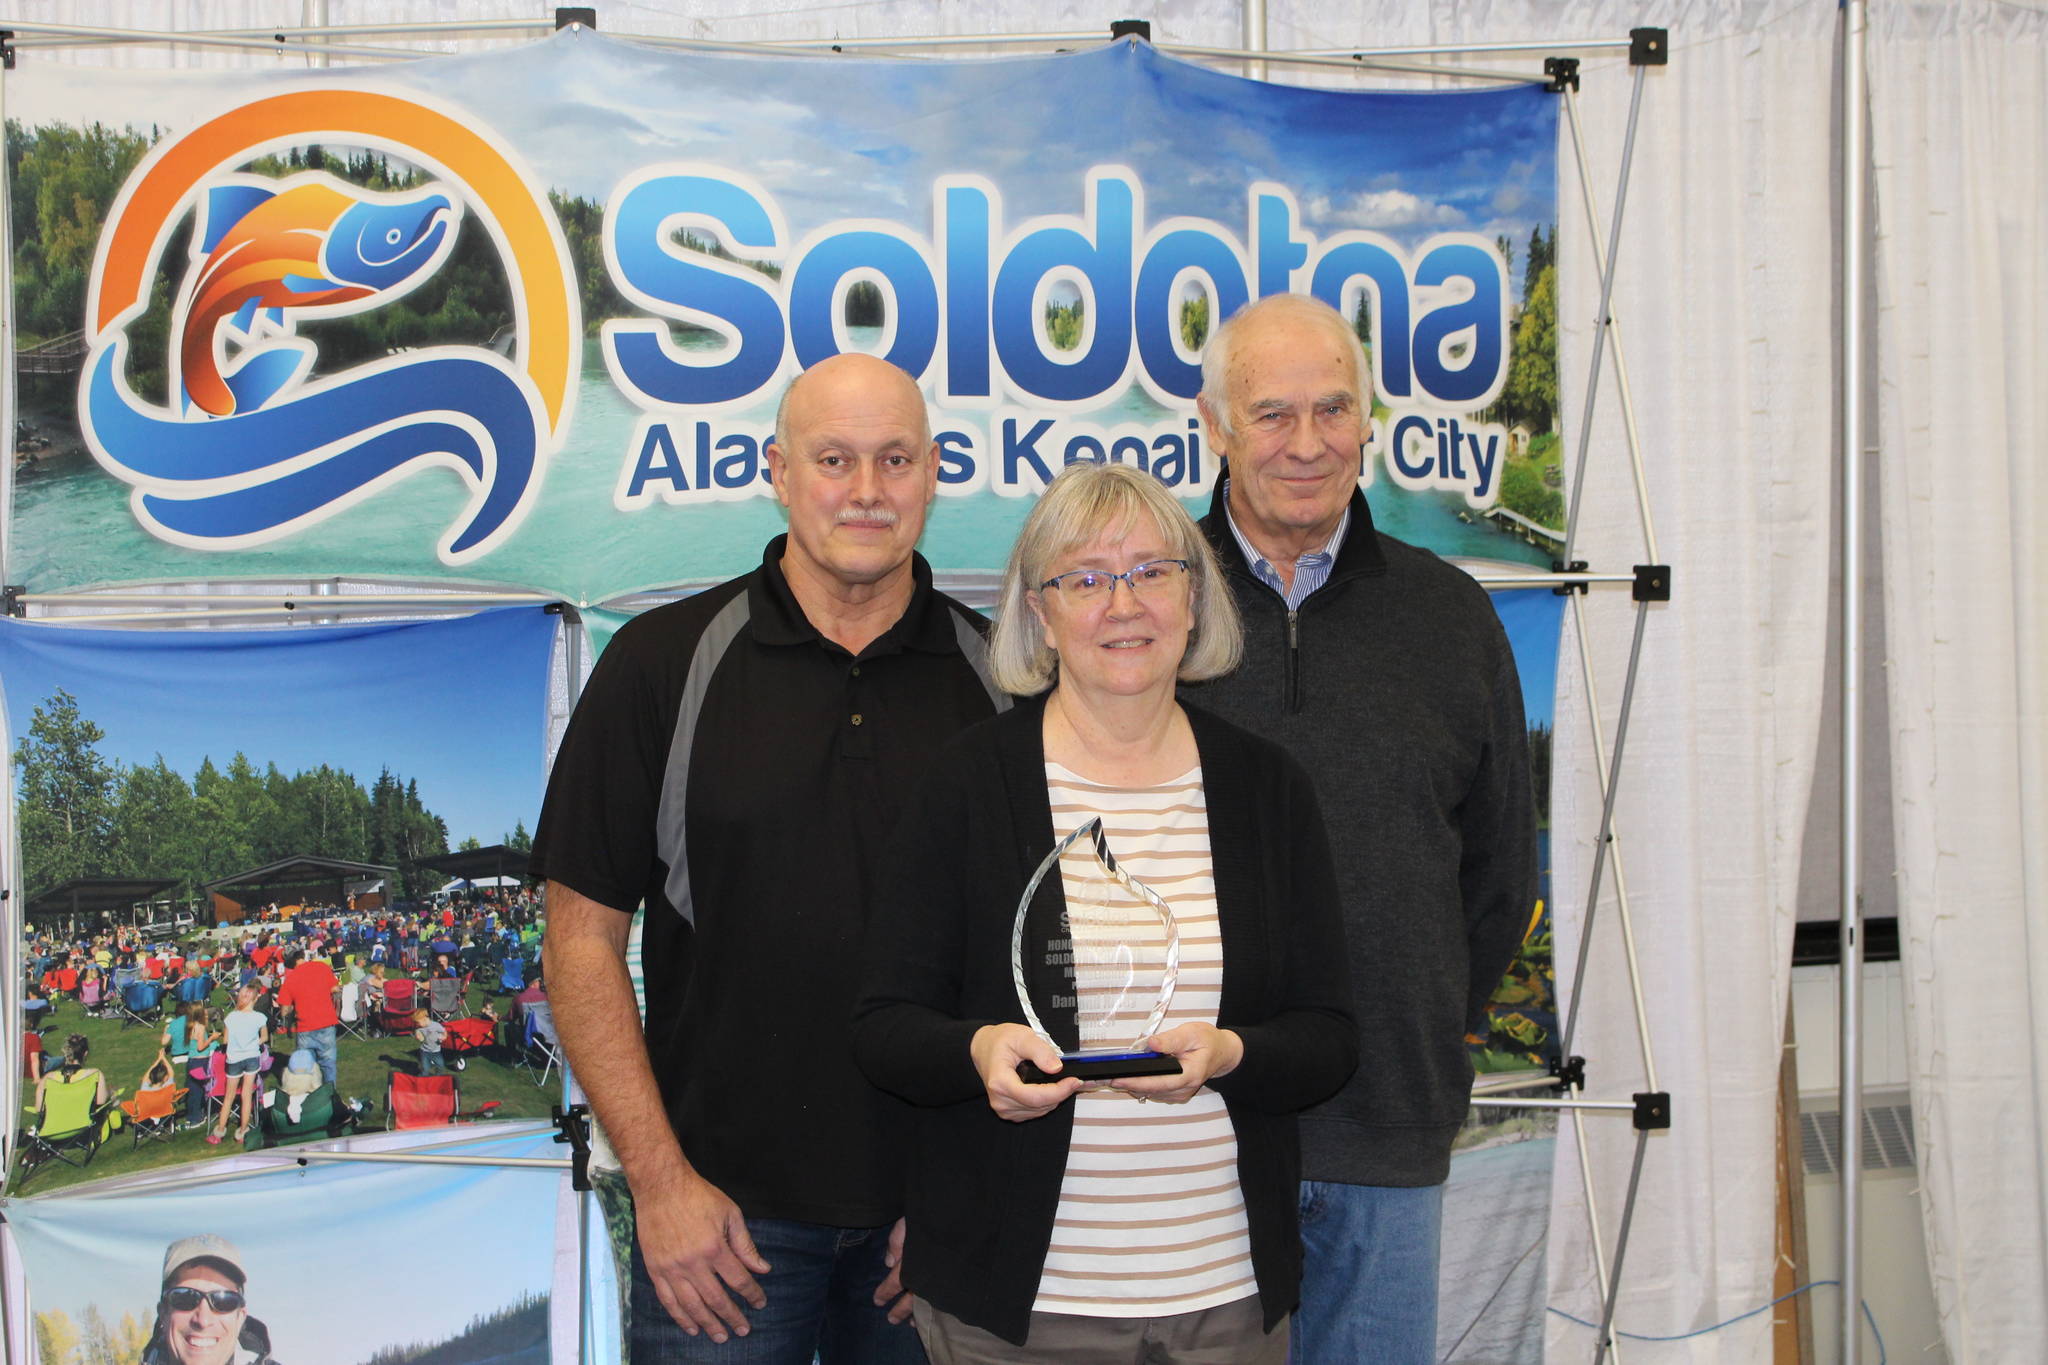 Dan Gensel, Kathy Gensel and Chamber President Jim Stogsdill smile for the camera at the Soldotna Chamber of Commerce Awards Luncheon at the Soldotna Regional Sports Complex on Dec. 11, 2019. (Photo by Brian Mazurek/Peninsula Clarion)